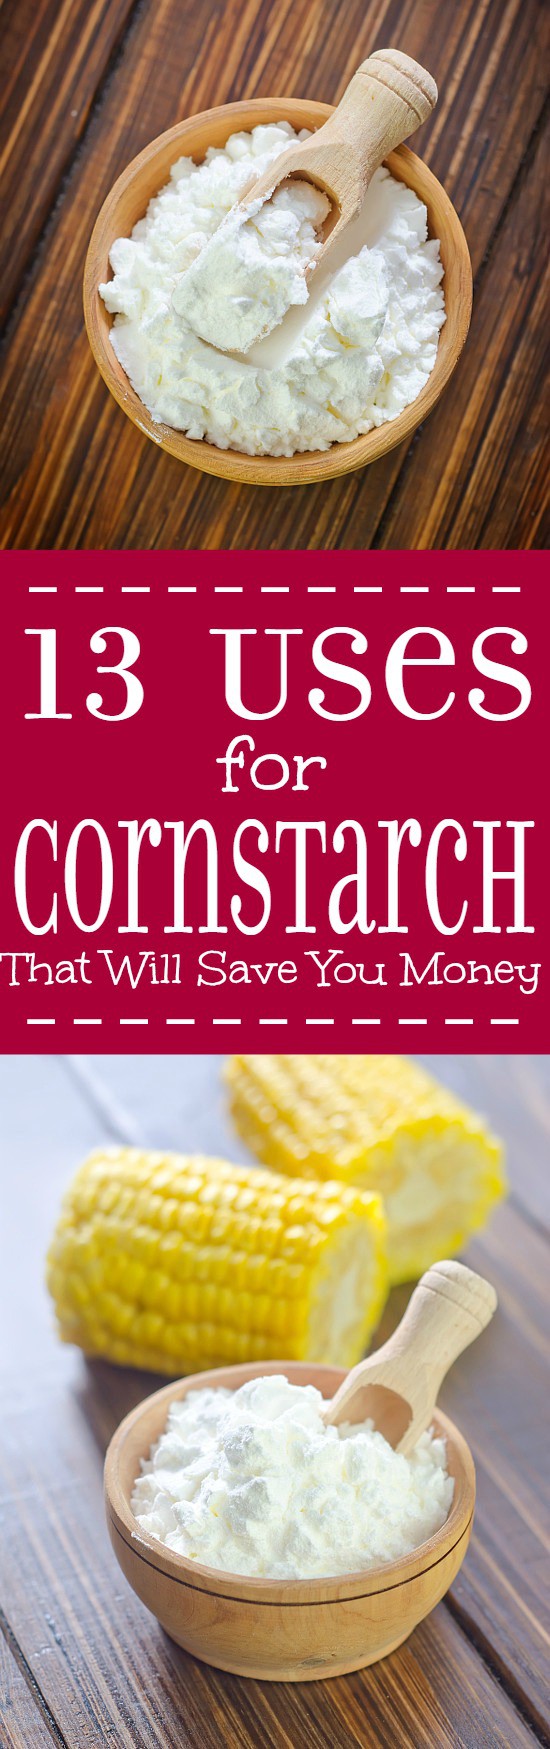 13 Uses for Cornstarch. Cornstarch isn't just for cooking! Here are 13 amazing Uses for Cornstarch that will save you money! So cool!